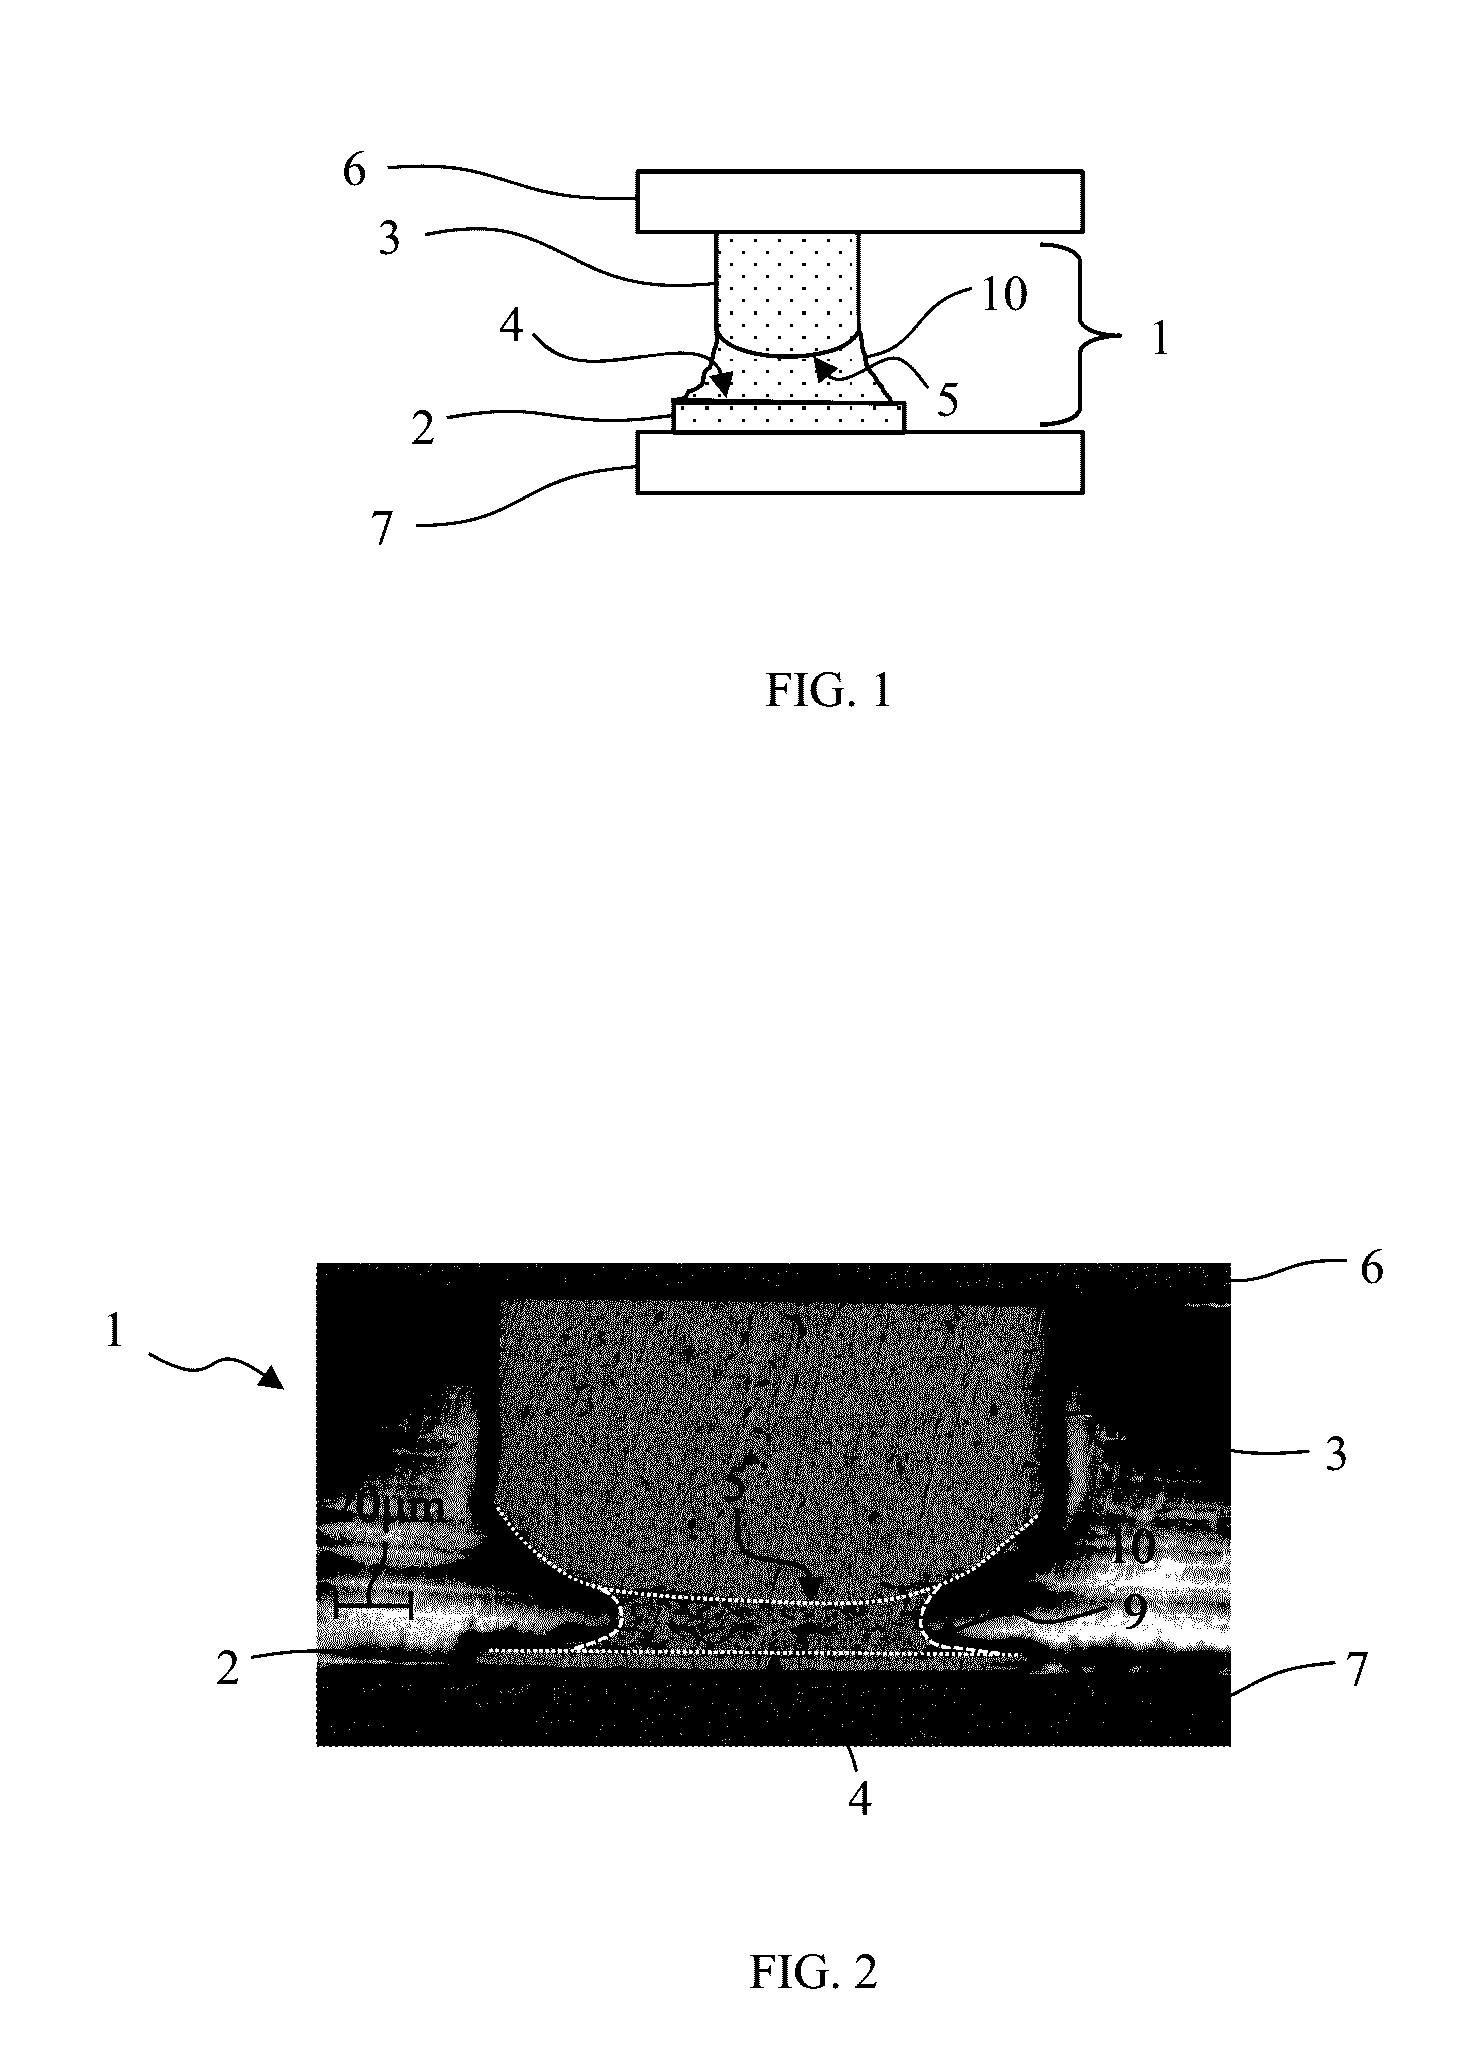 Method for electrical coupling and electric coupling arrangement